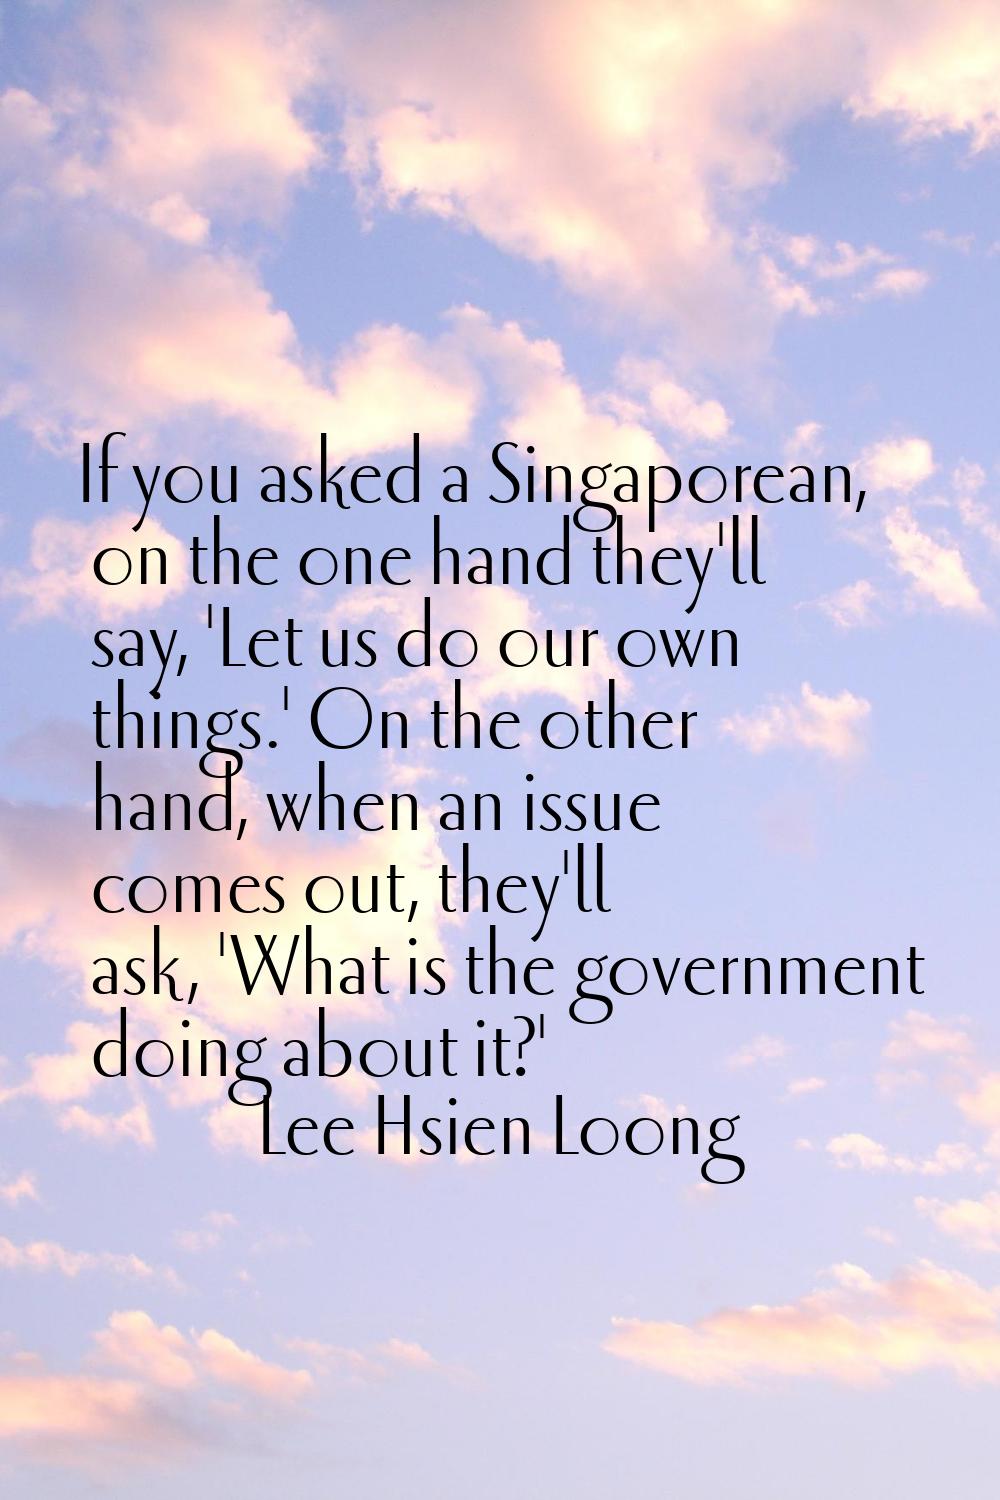 If you asked a Singaporean, on the one hand they'll say, 'Let us do our own things.' On the other h